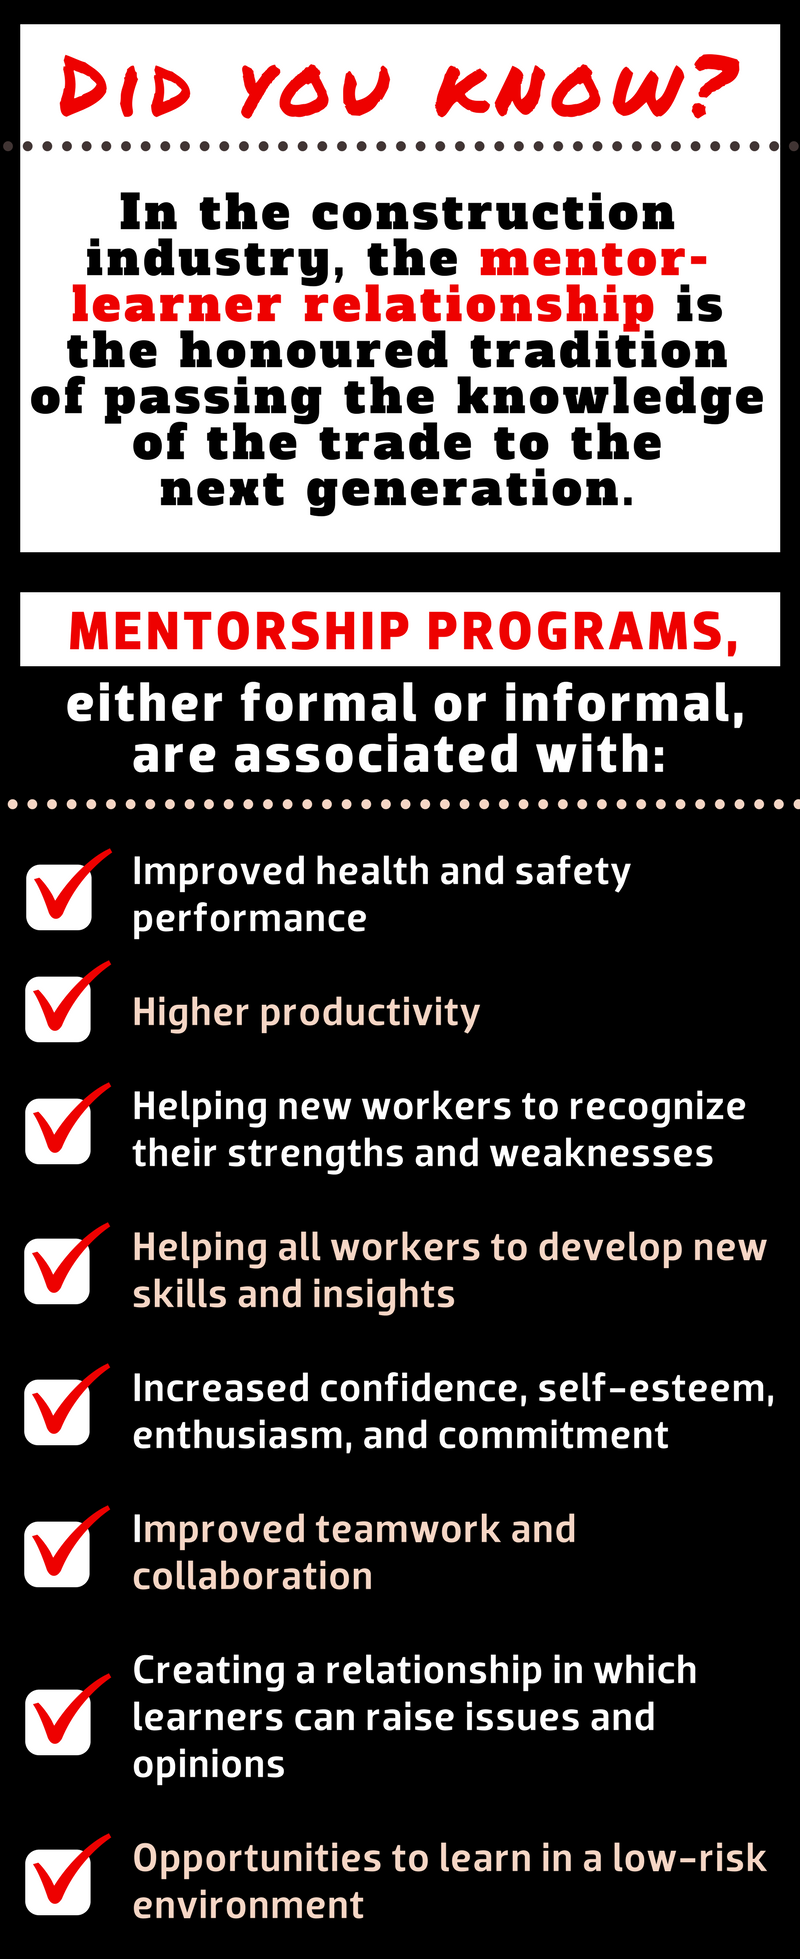 Mentorship programs, either formal or informal, are associated with these benefits.